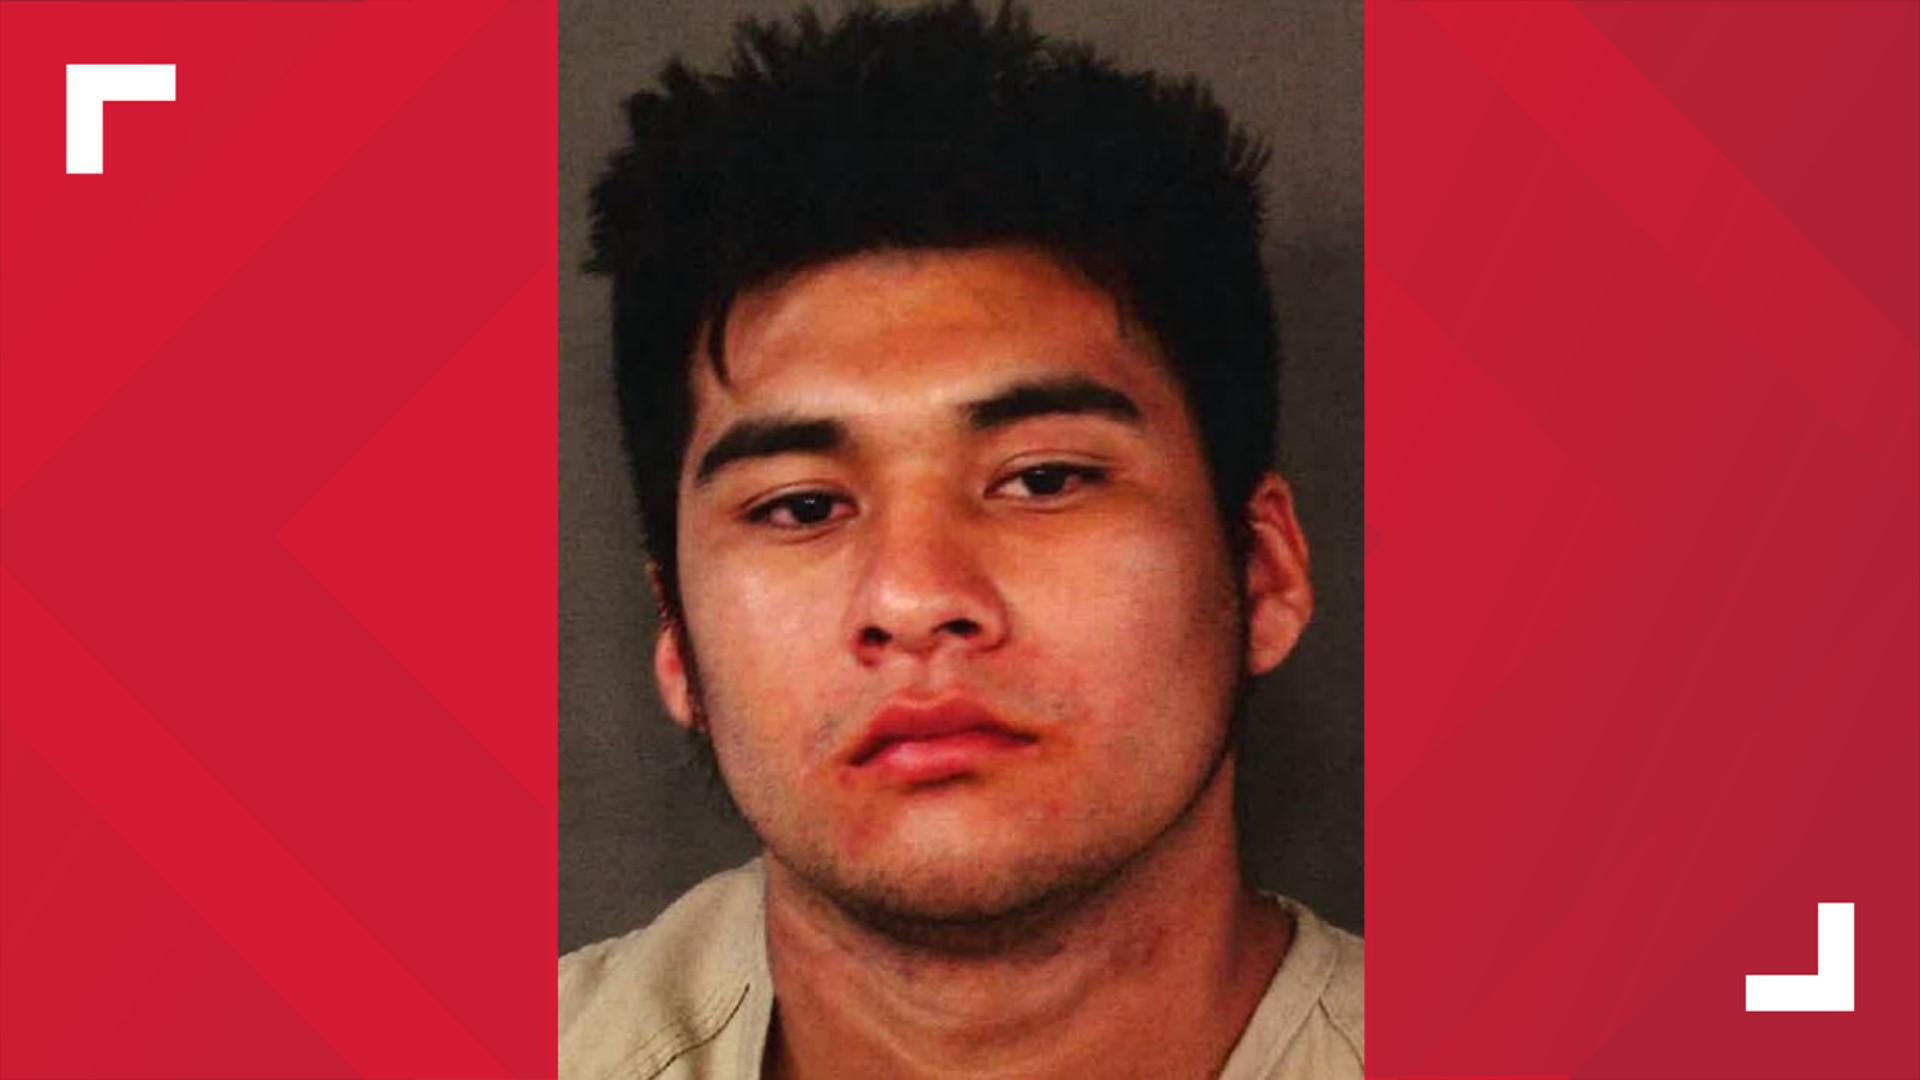 Mario Sanchez was sentenced to 15 years to life for murder and three years for discharging a firearm near prohibited premises.